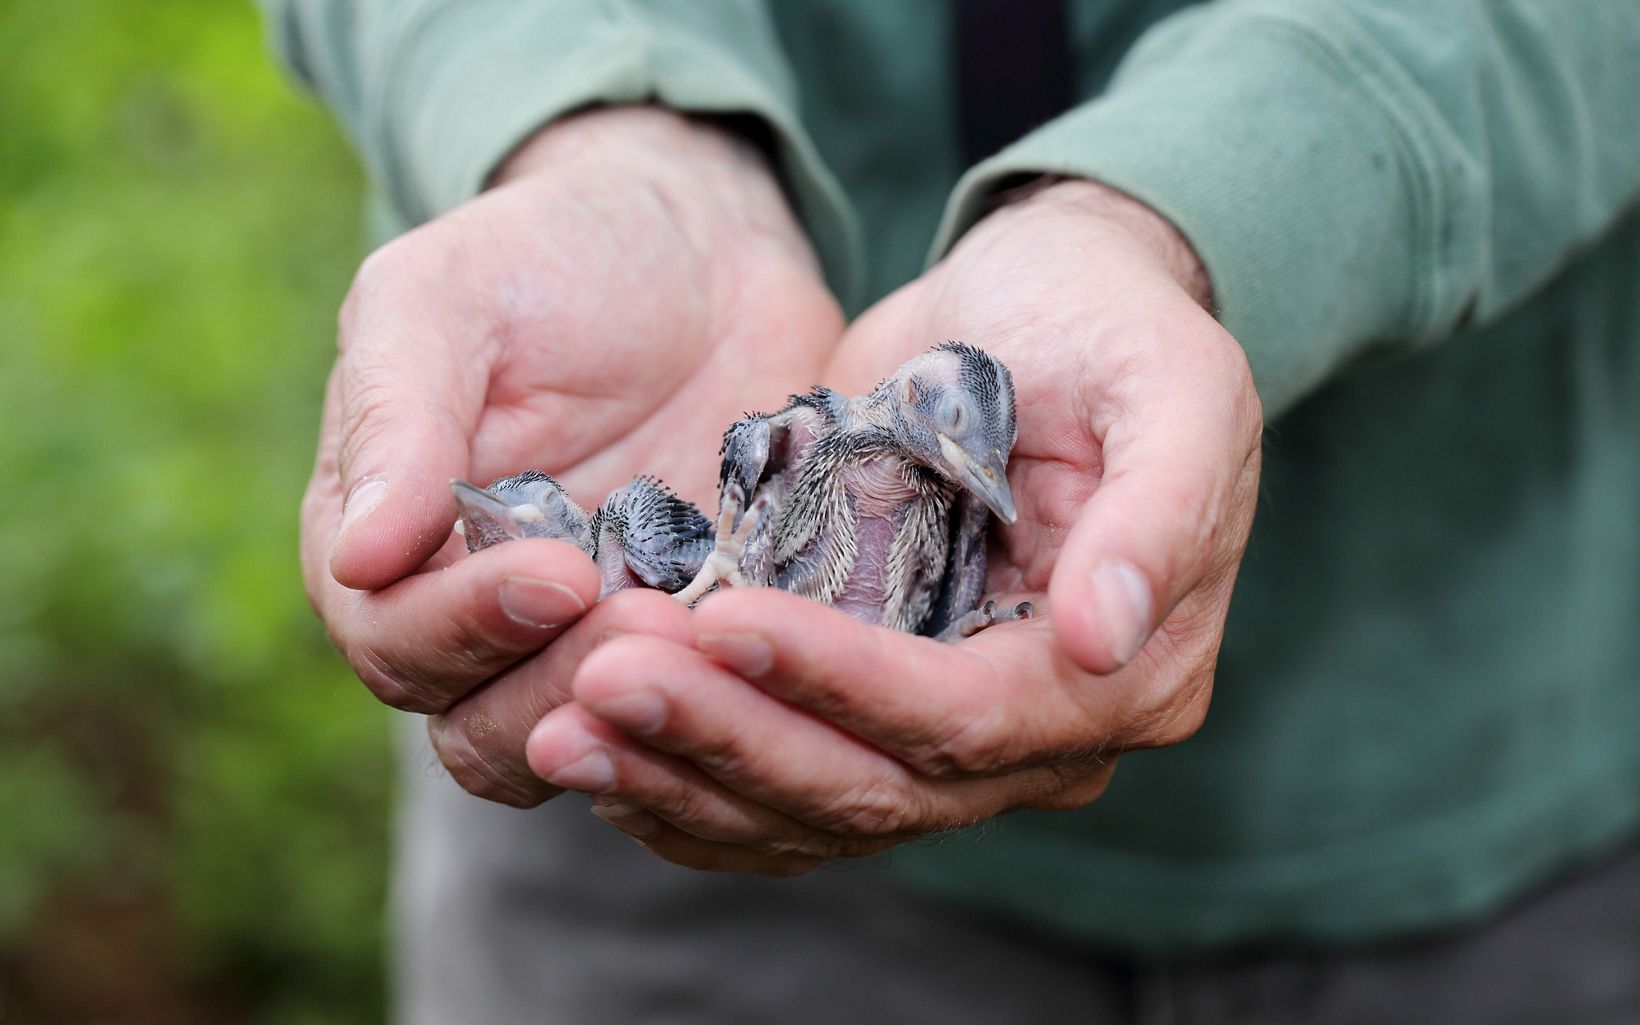 A pair of 9-10 day old nestling red-cockaded woodpeckers.  The young chicks are briefly removed from the nest for banding when they are 5-10 days old.